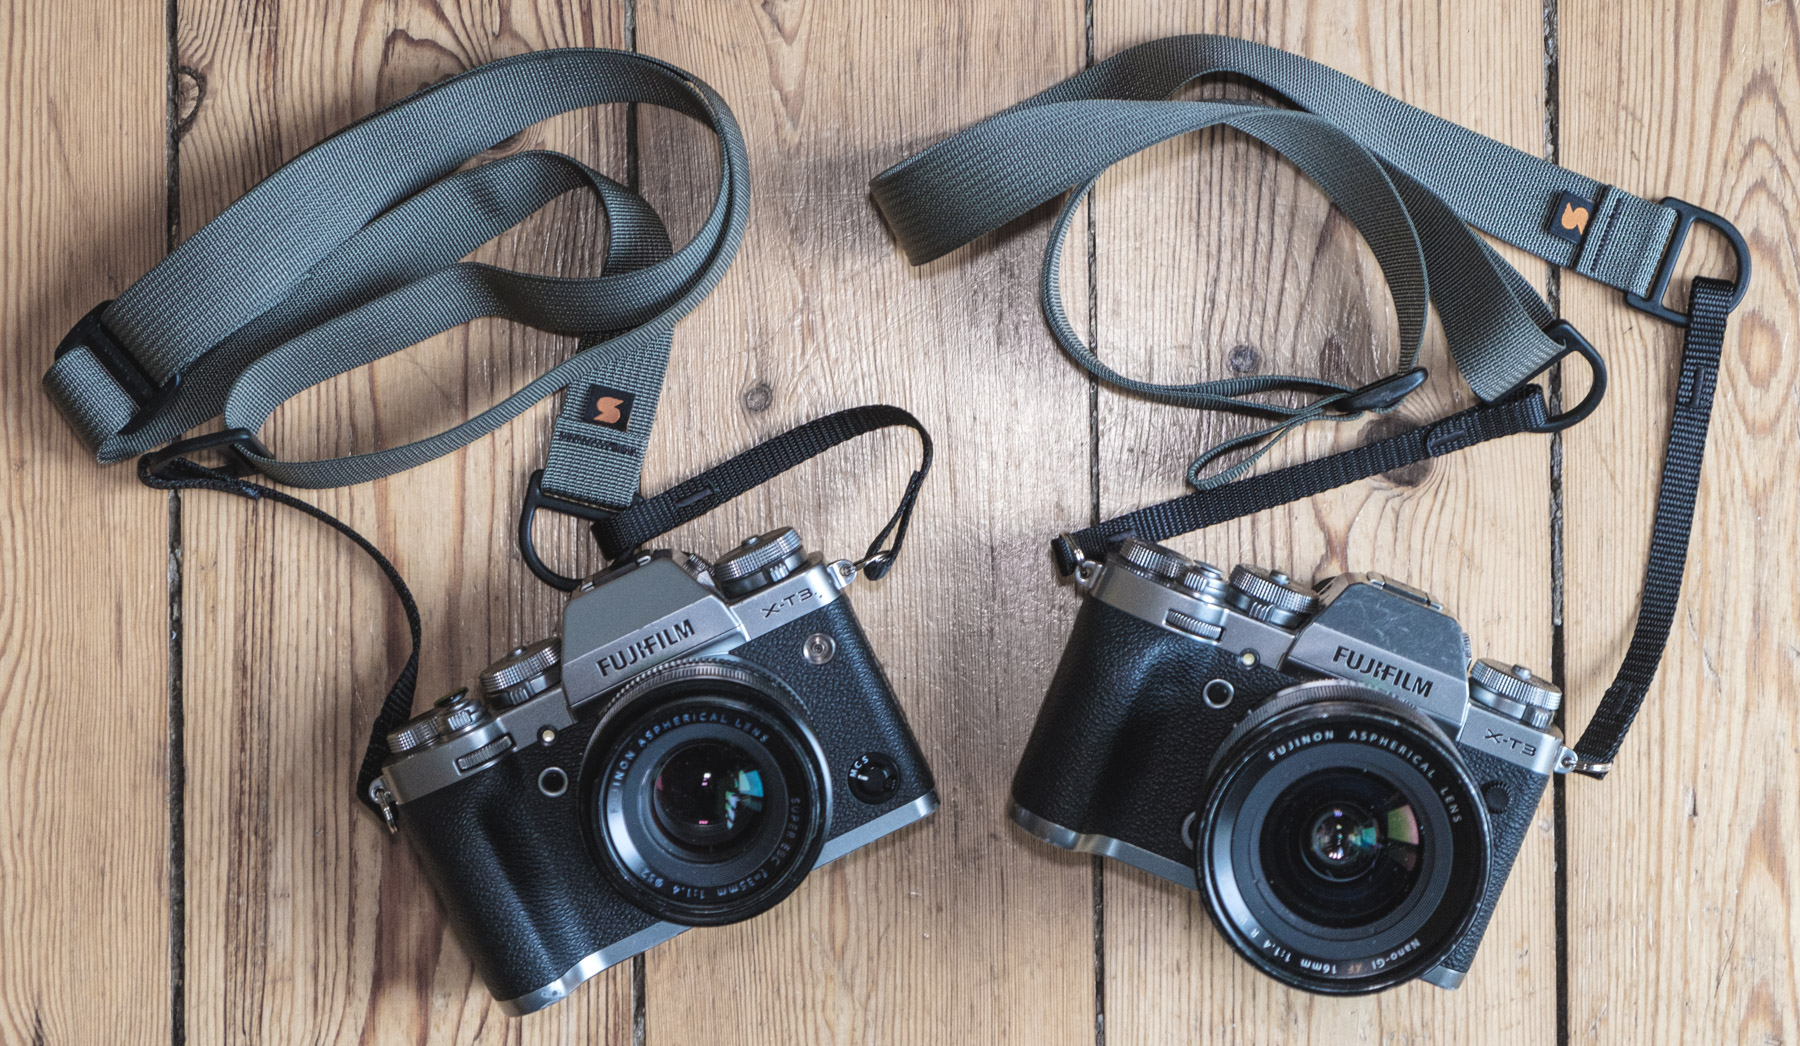 Simplr F1 camera strap - simply my favourite strap! - Flemming Bo